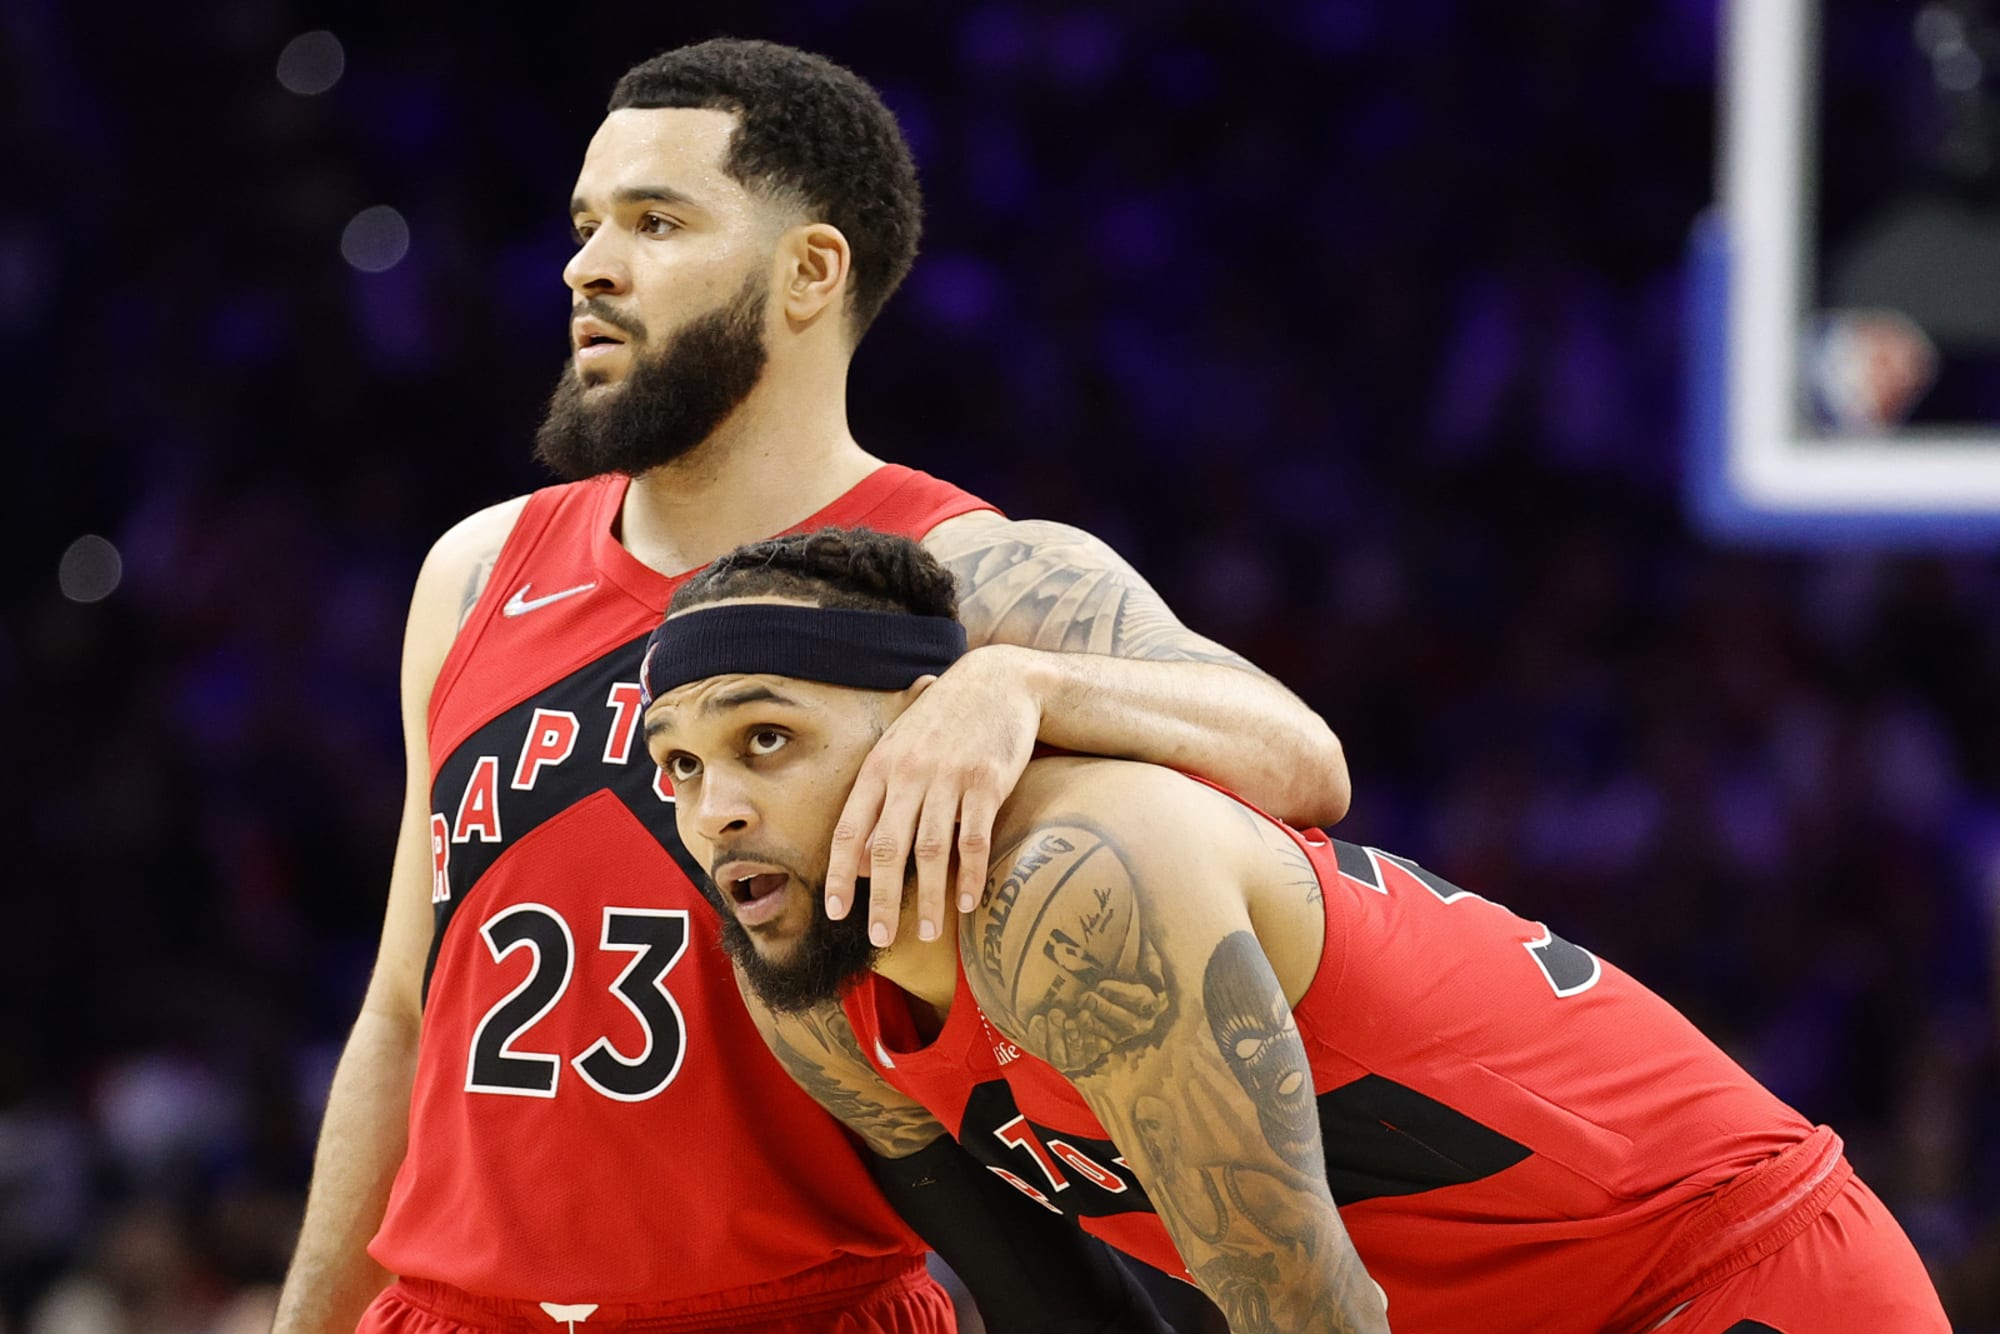 Raptors Game Tonight Raptors vs 76ers Odds, Starting Lineup, Injury Report, Predictions, TV Channel for NBA Playoffs Game 3